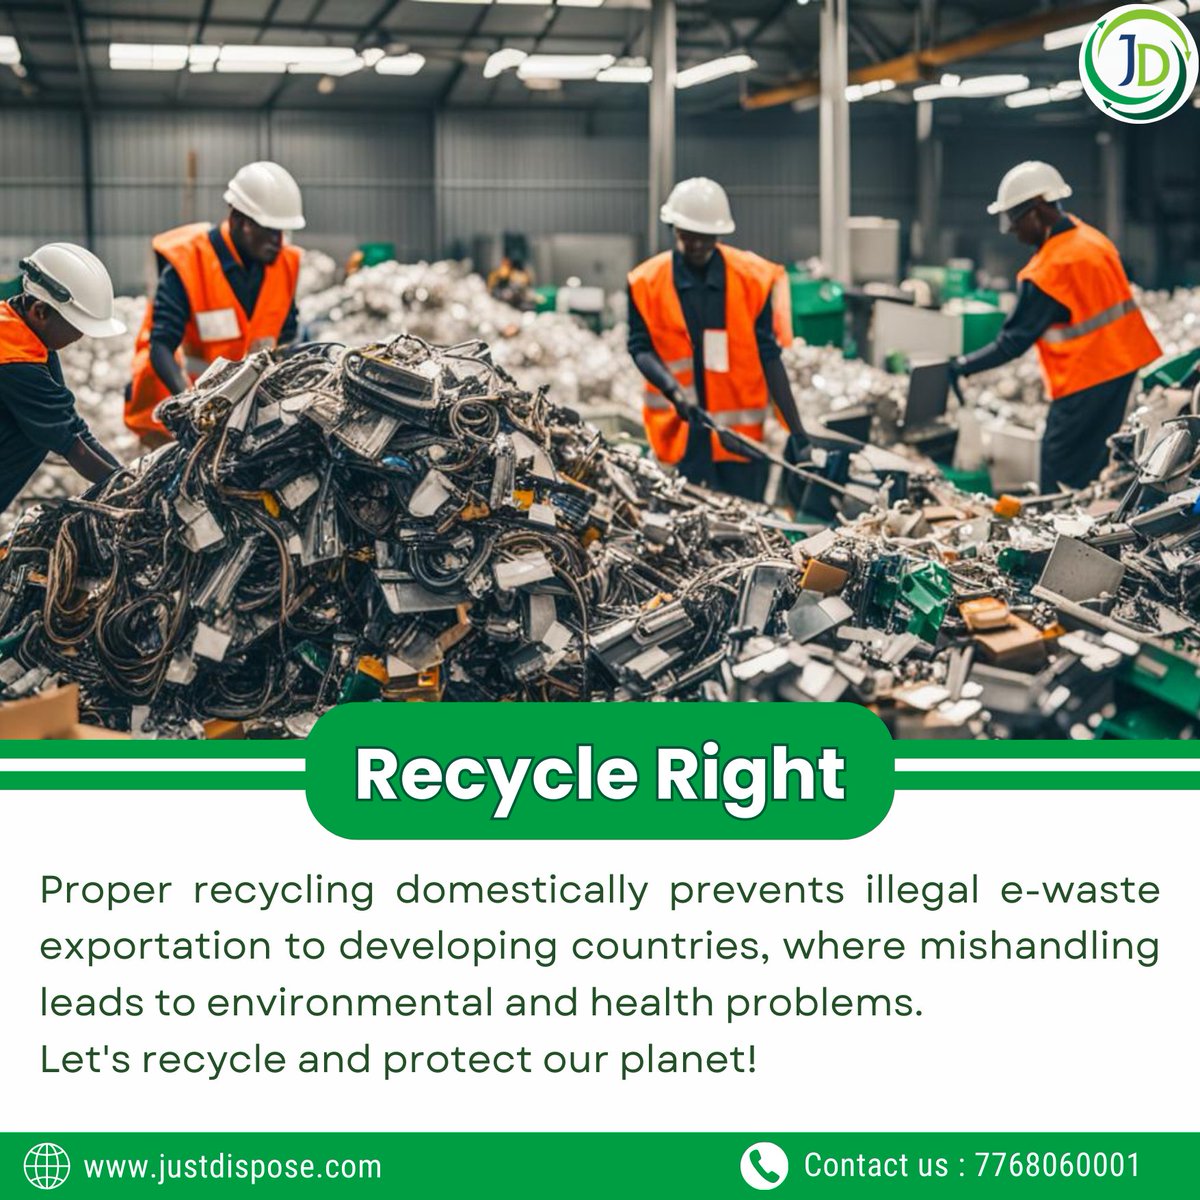 Protect the environment and global health by recycling e-waste correctly. Act locally, impact globally!
Visit justdispose.com
.
#ewaste #recycling #electronicwaste #simplifyingdisposal #sustainable #future #ewasterecycling #recycle #ecofriendly #nature #greenearth #reuse